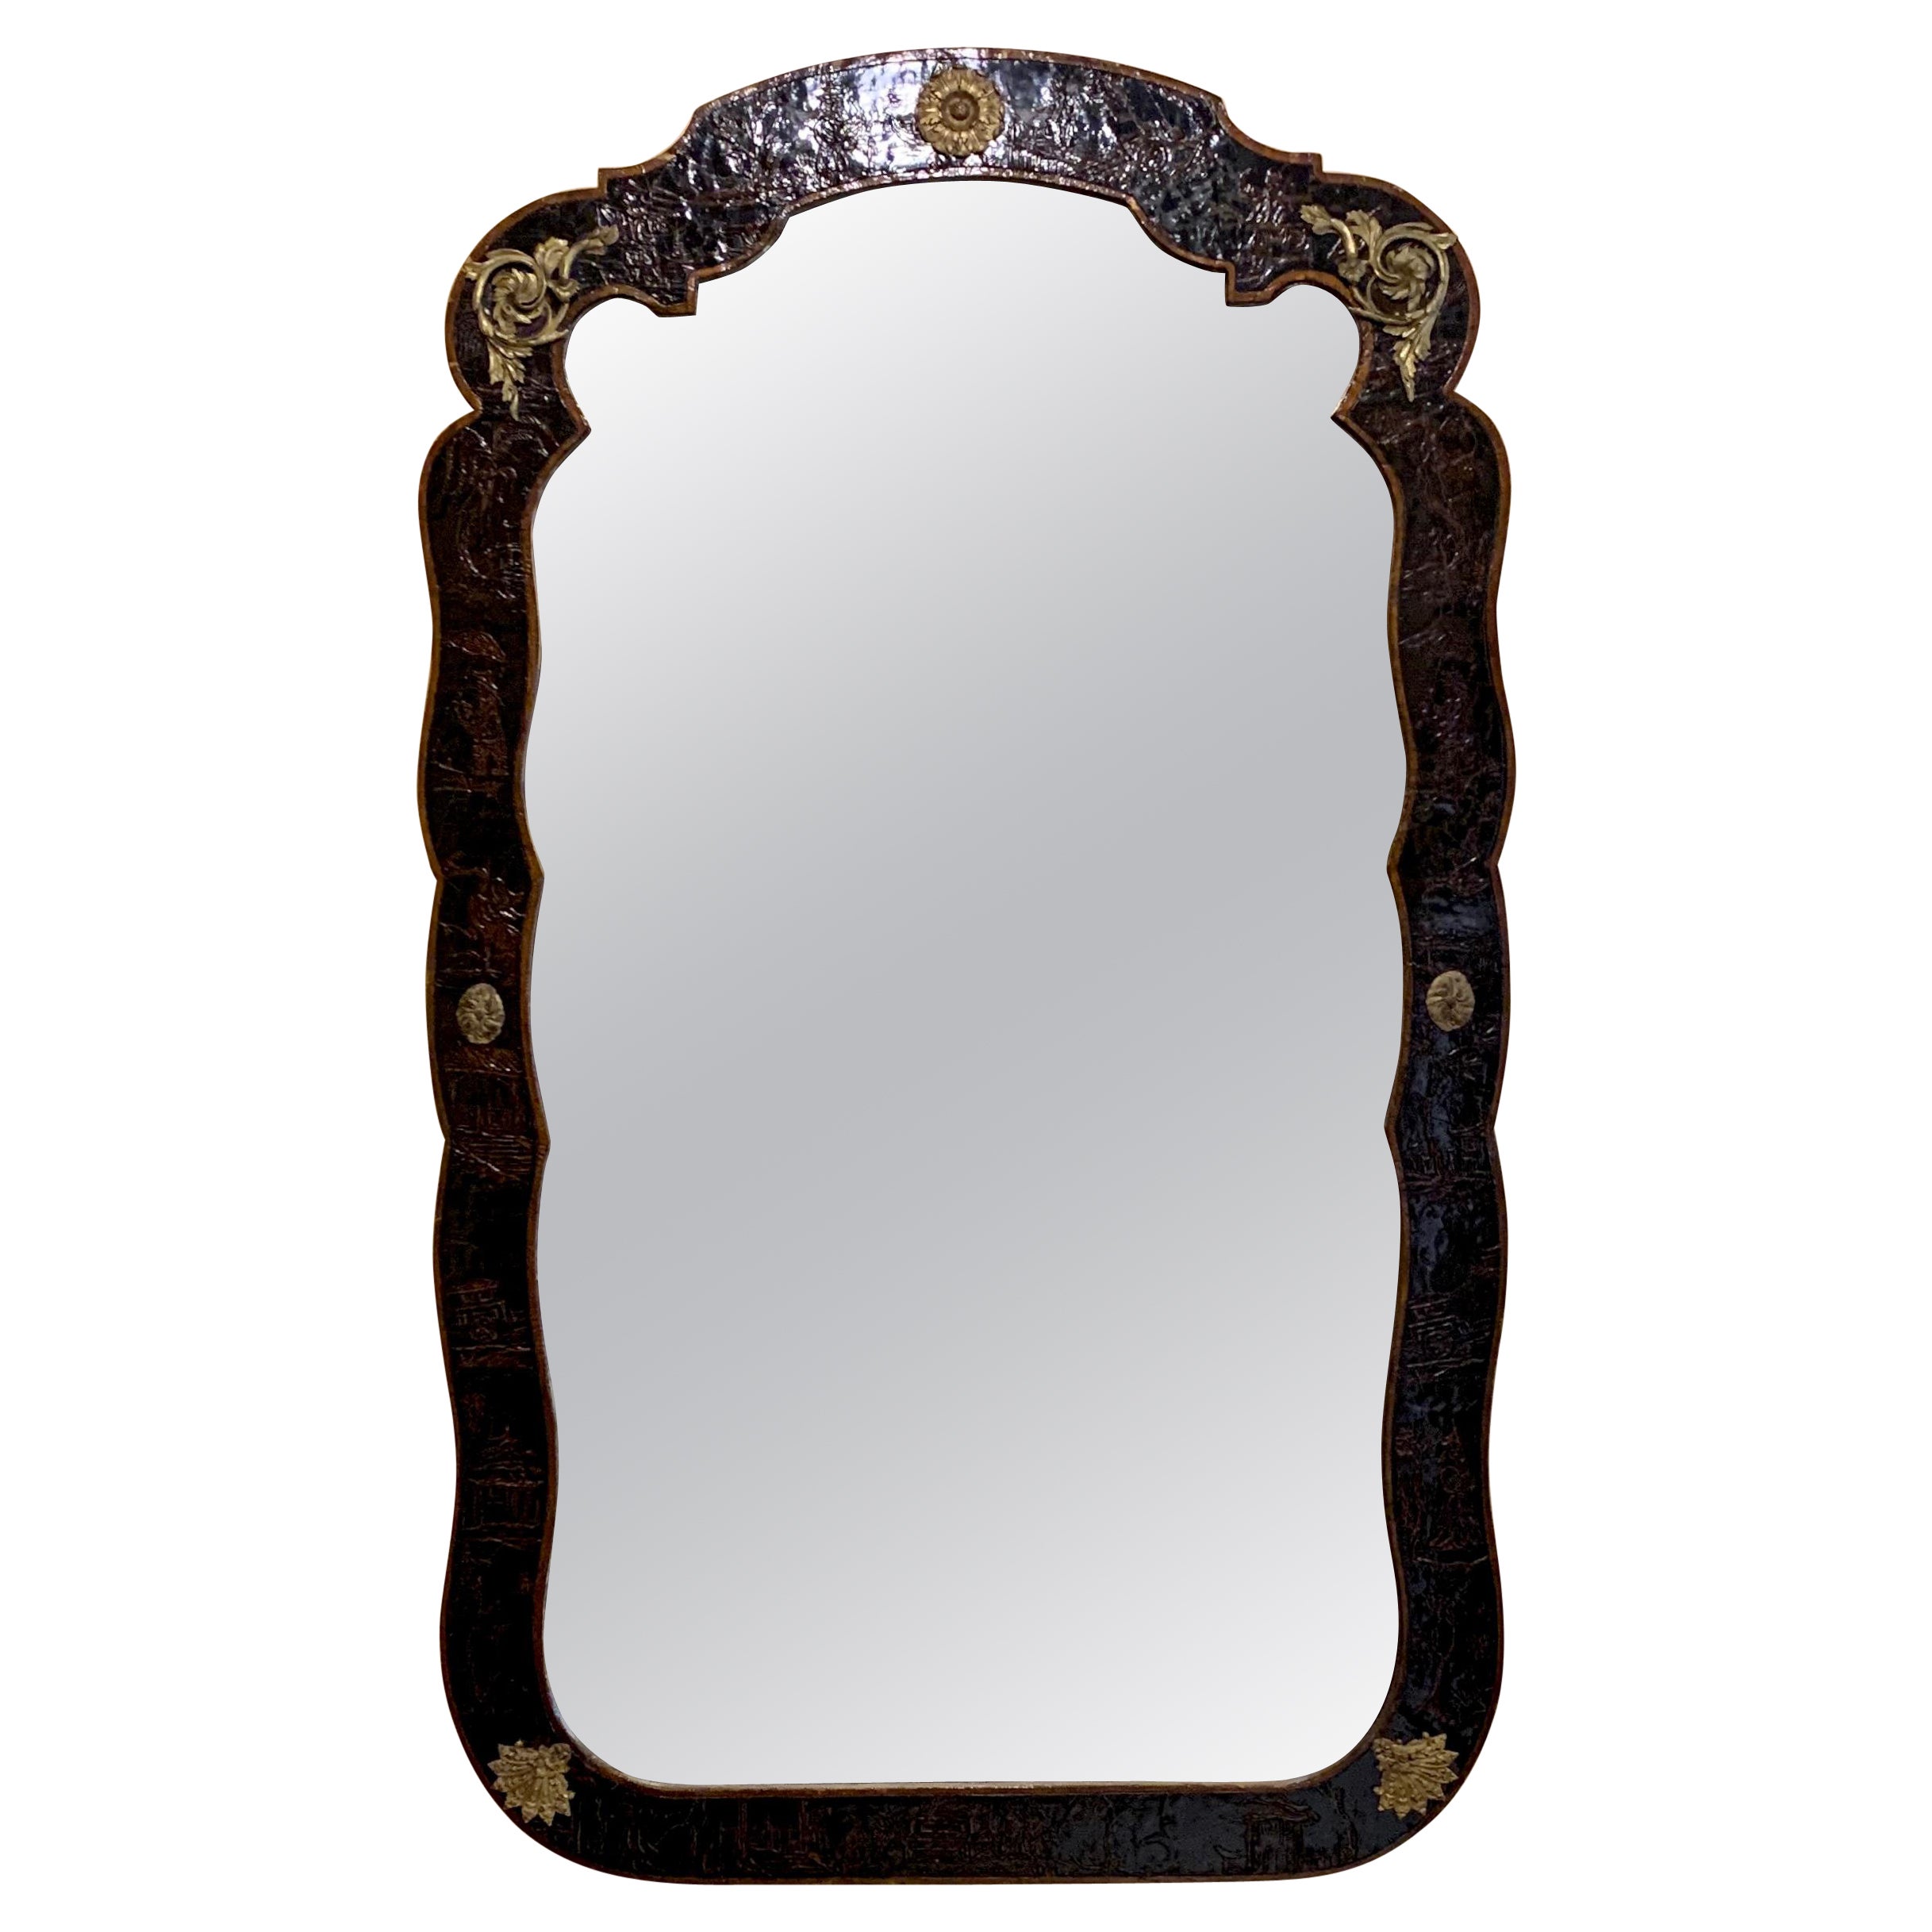 Antique French Chinoiserie Style Lacquer Mirror, Circa 1890-1910